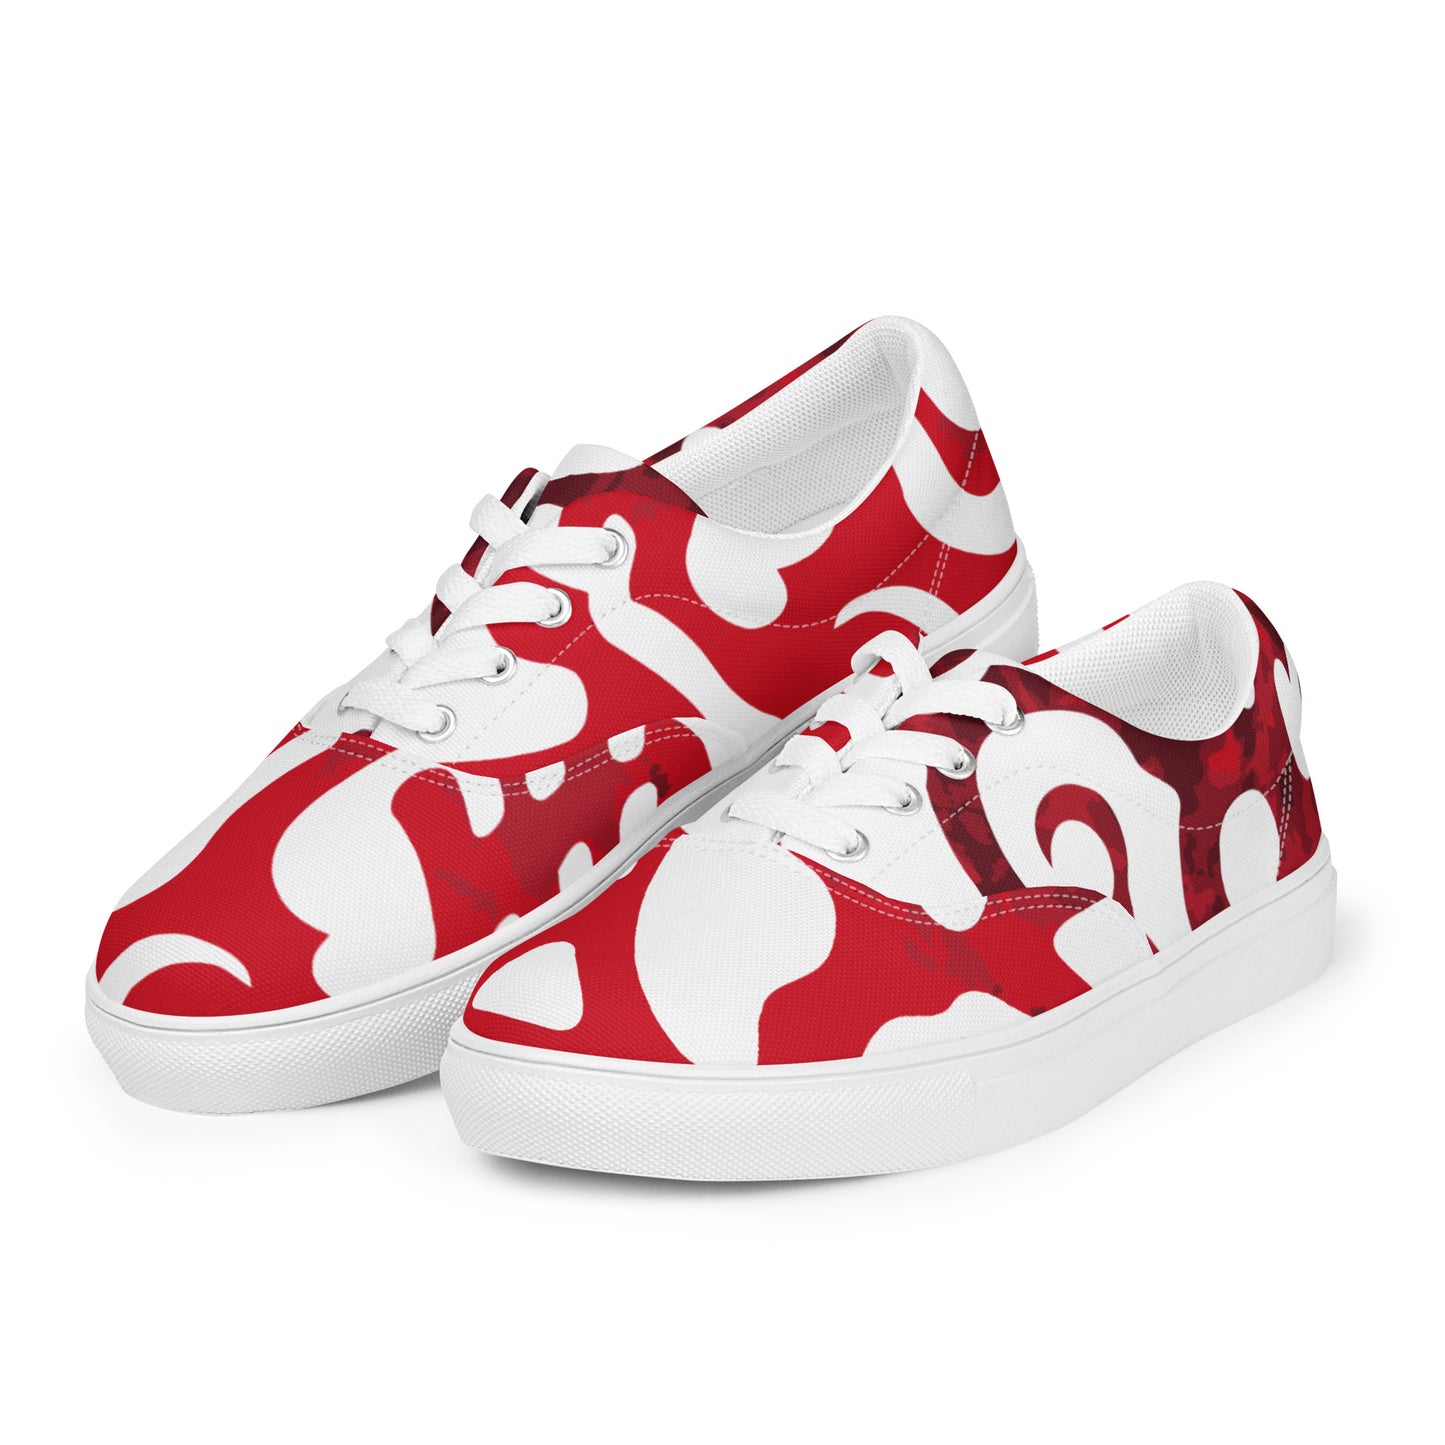 ROYALS by DOLVING - Women’s lace-up canvas shoes